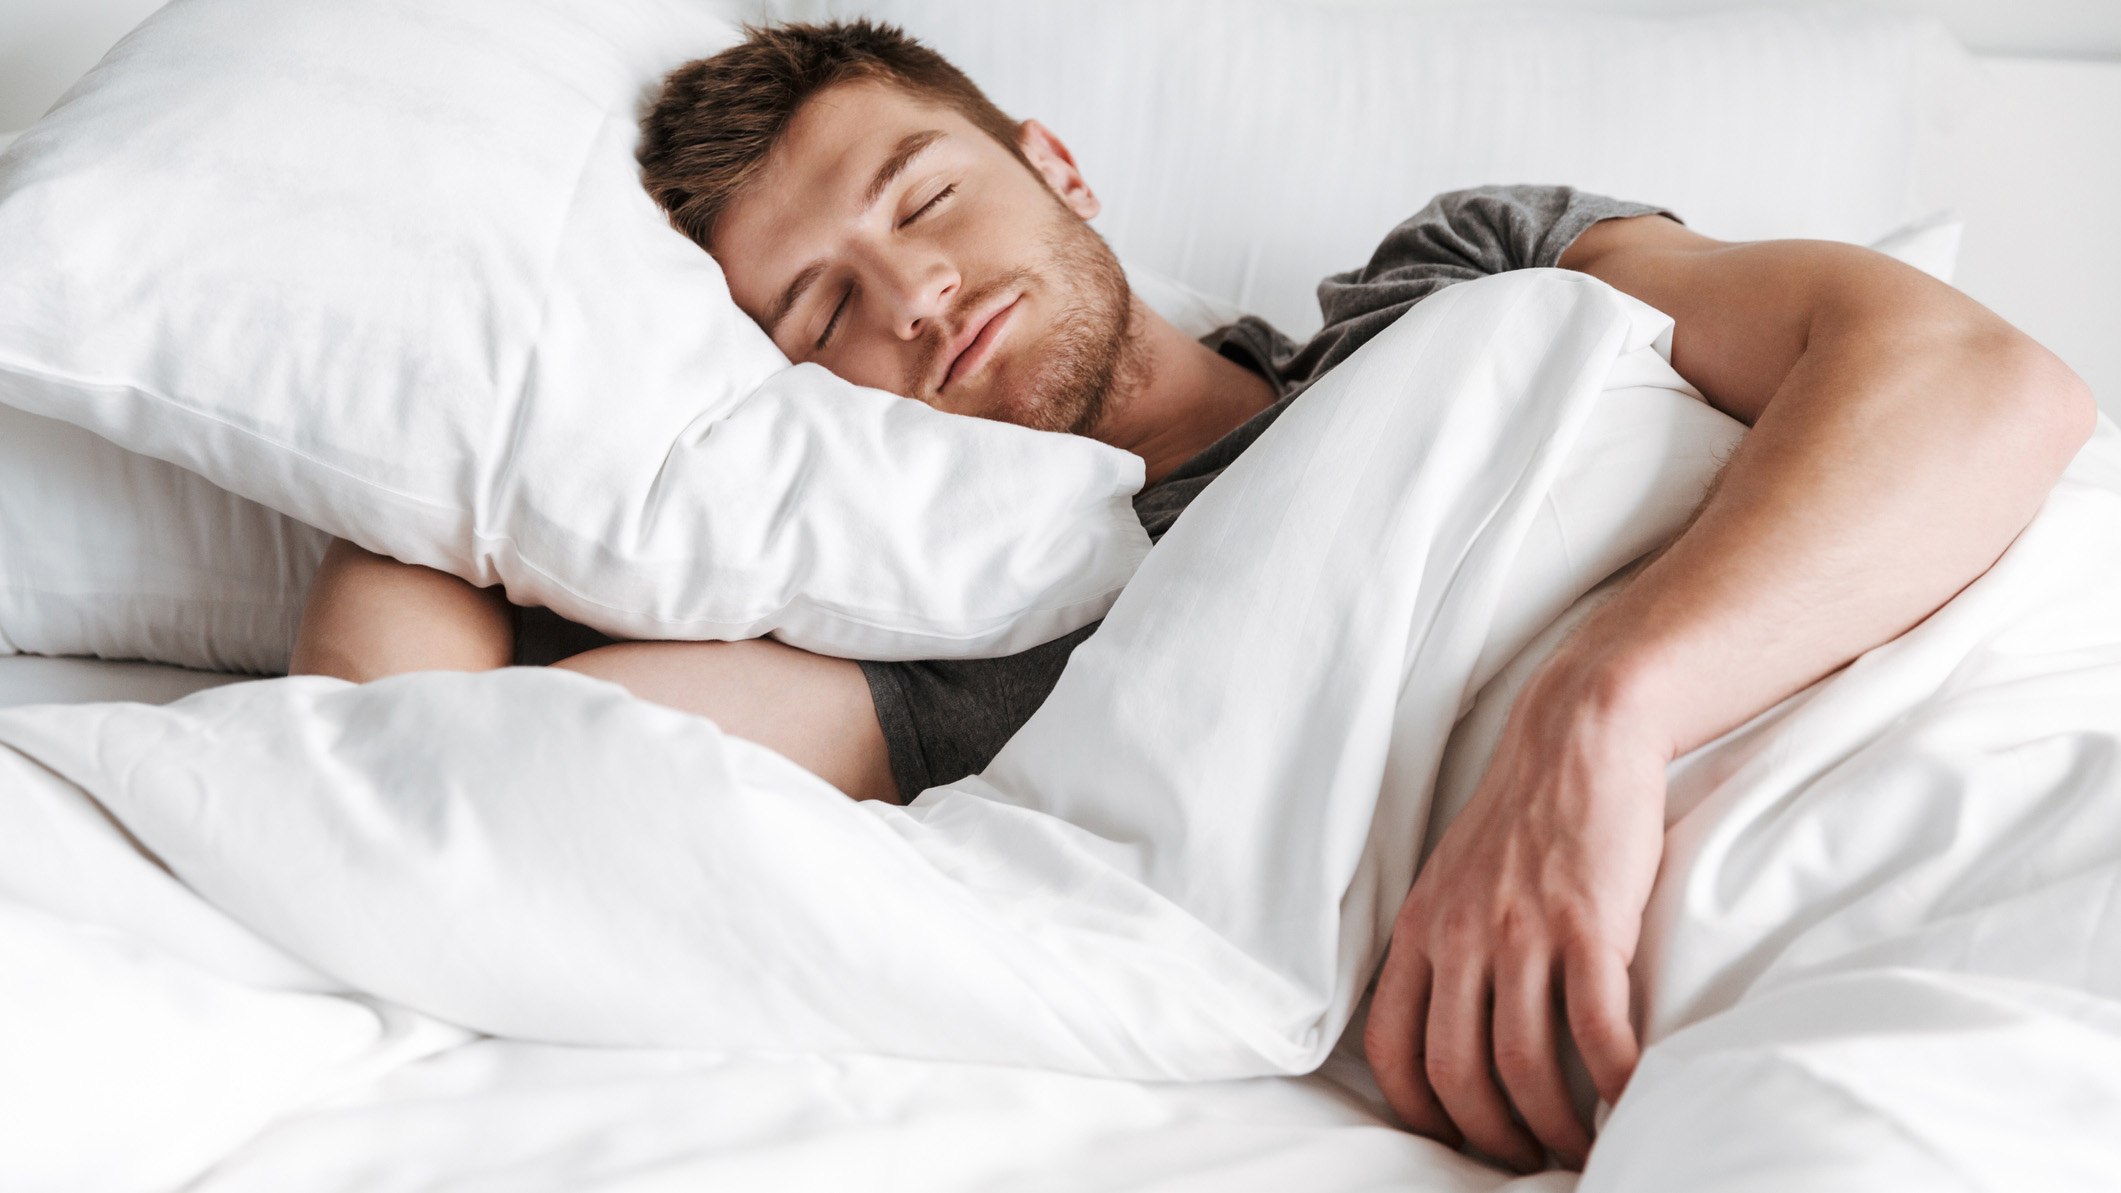 A dark-haired man sleeps on his side covered with a white duvet